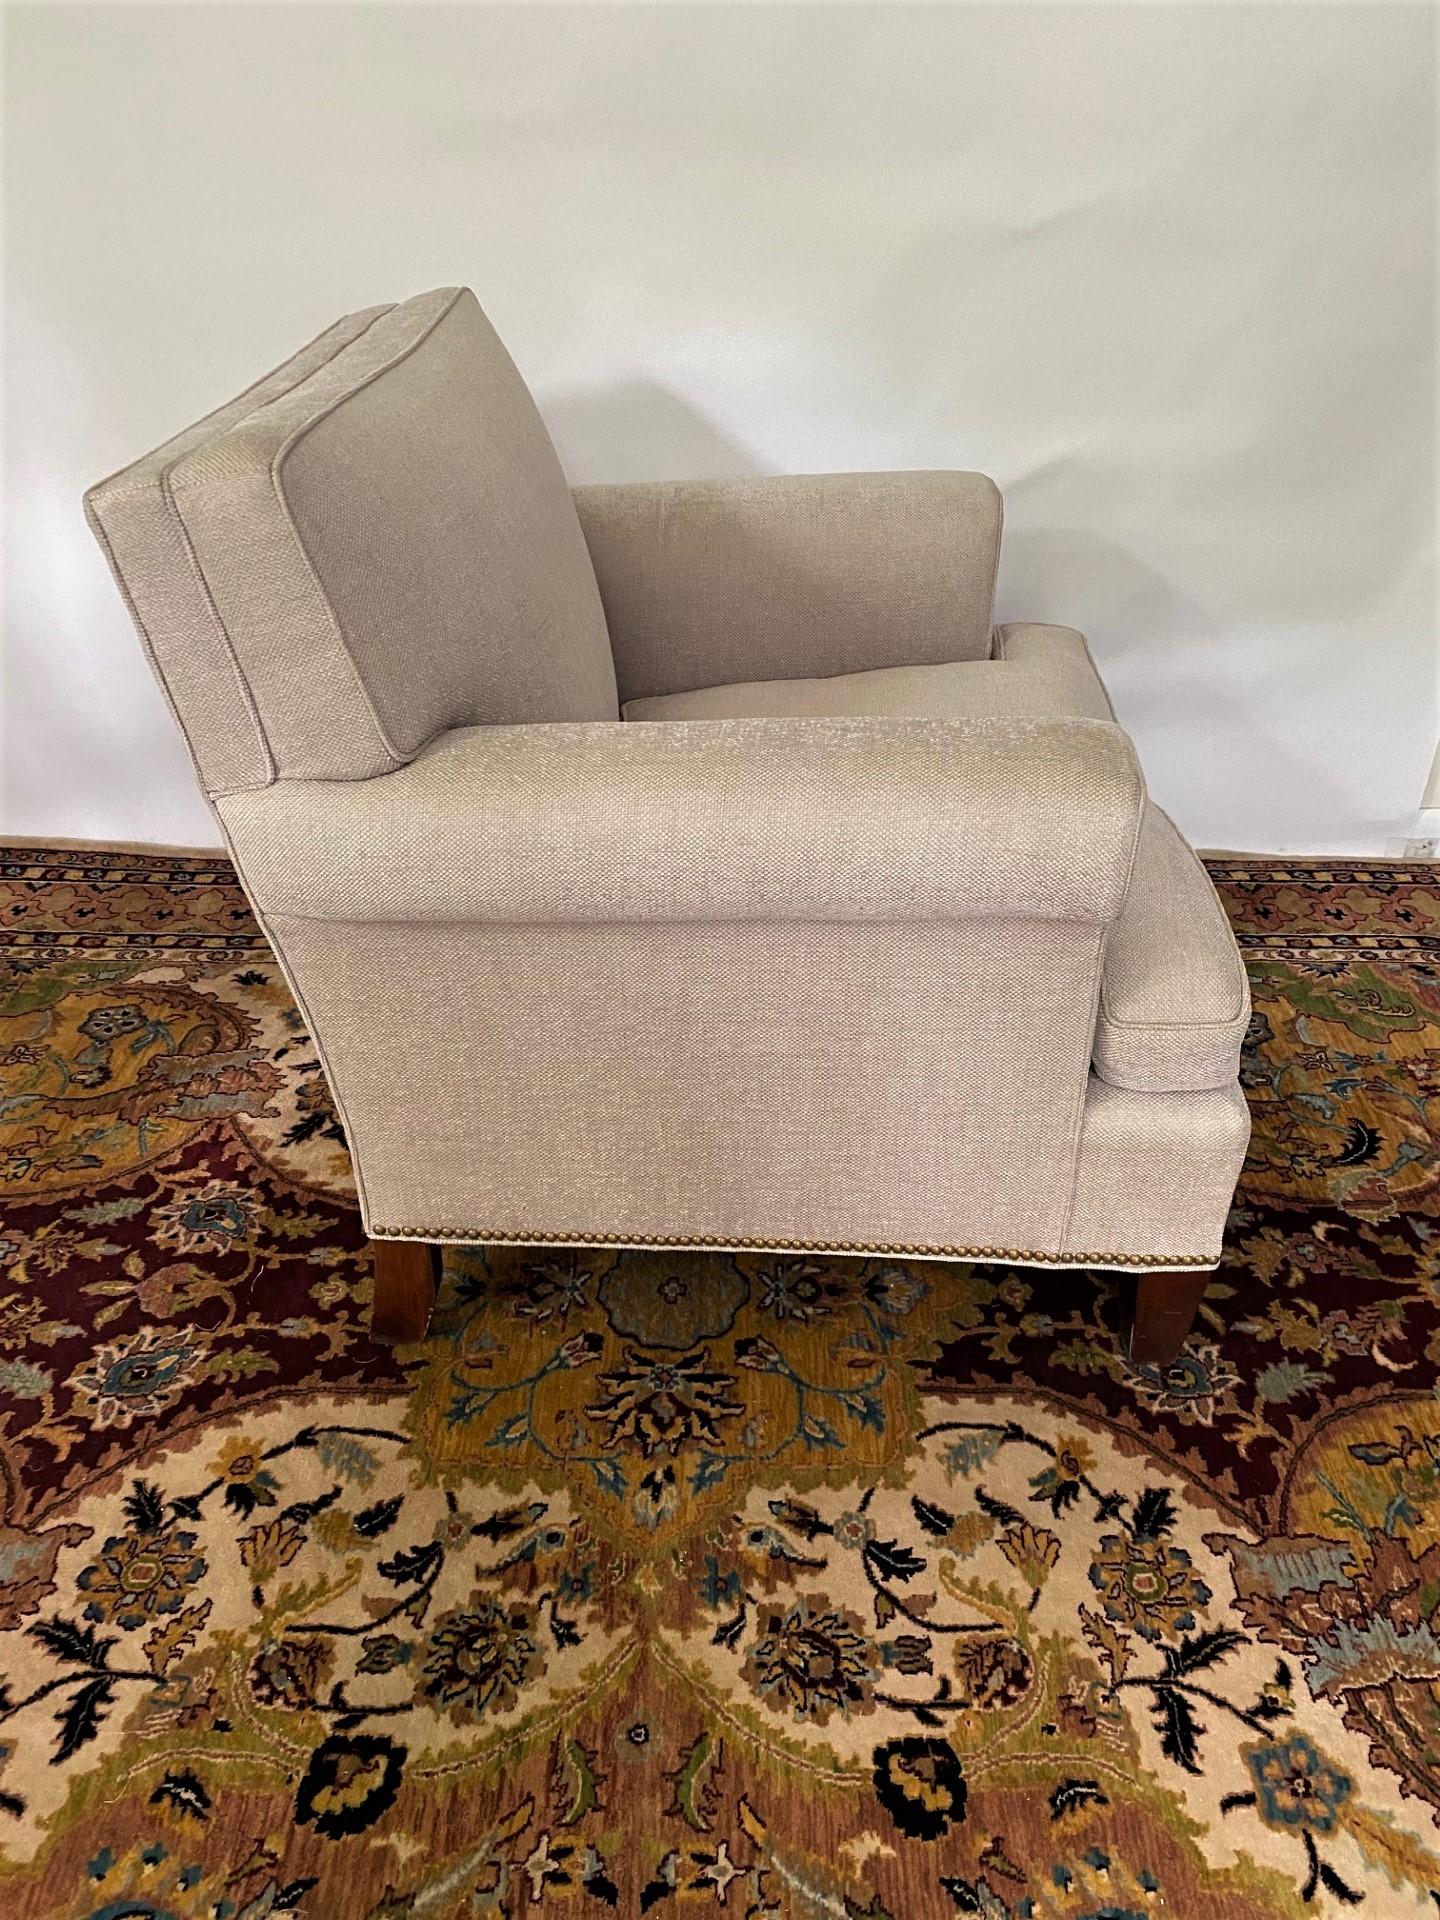 New Lawson Style Lounge Chair with Down Seat Cushion, in Stock In Excellent Condition For Sale In North Salem, NY